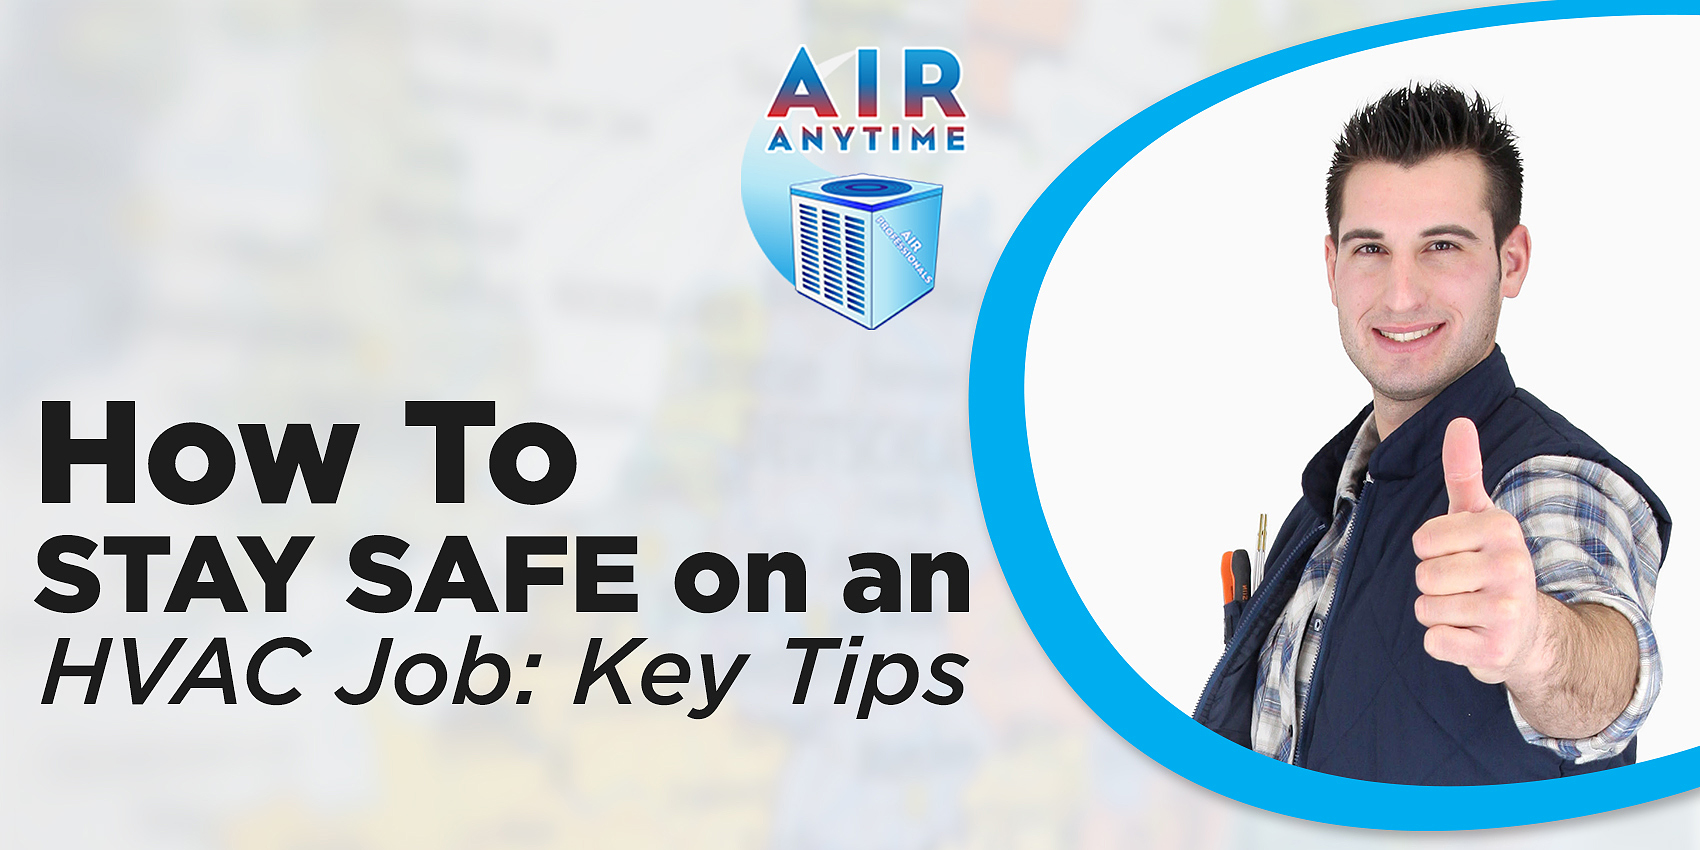 How to Stay Safe on an HVAC Job: Key Tips